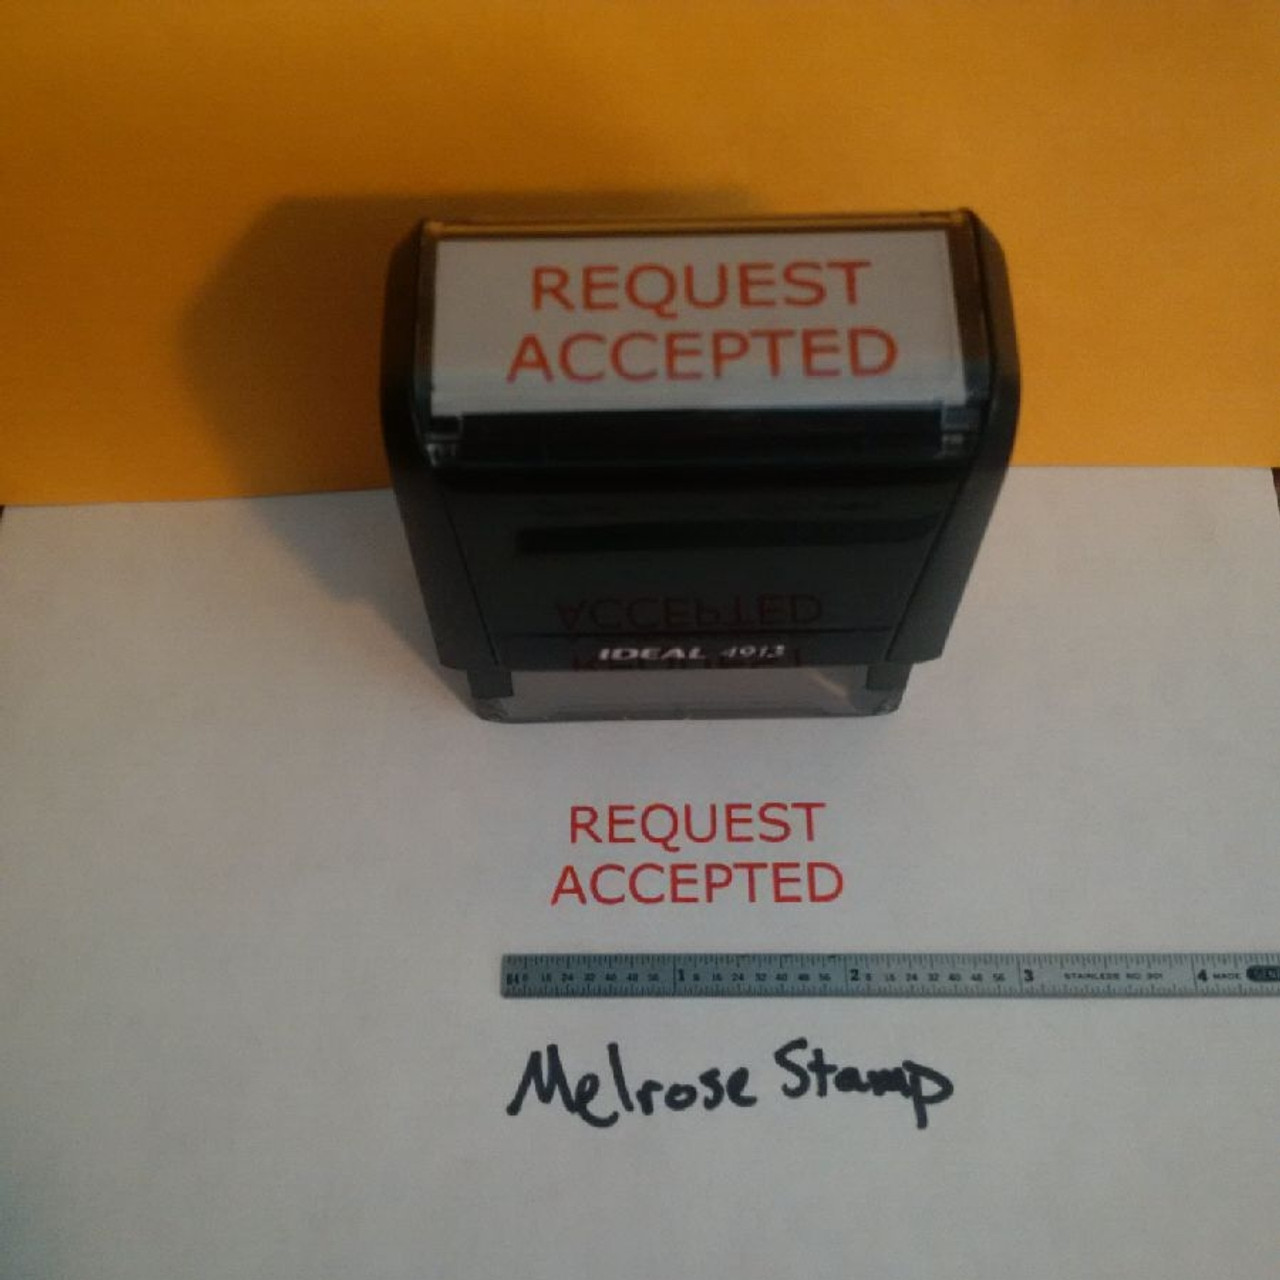 REQUEST ACCEPTED Rubber Stamp for office use self-inking